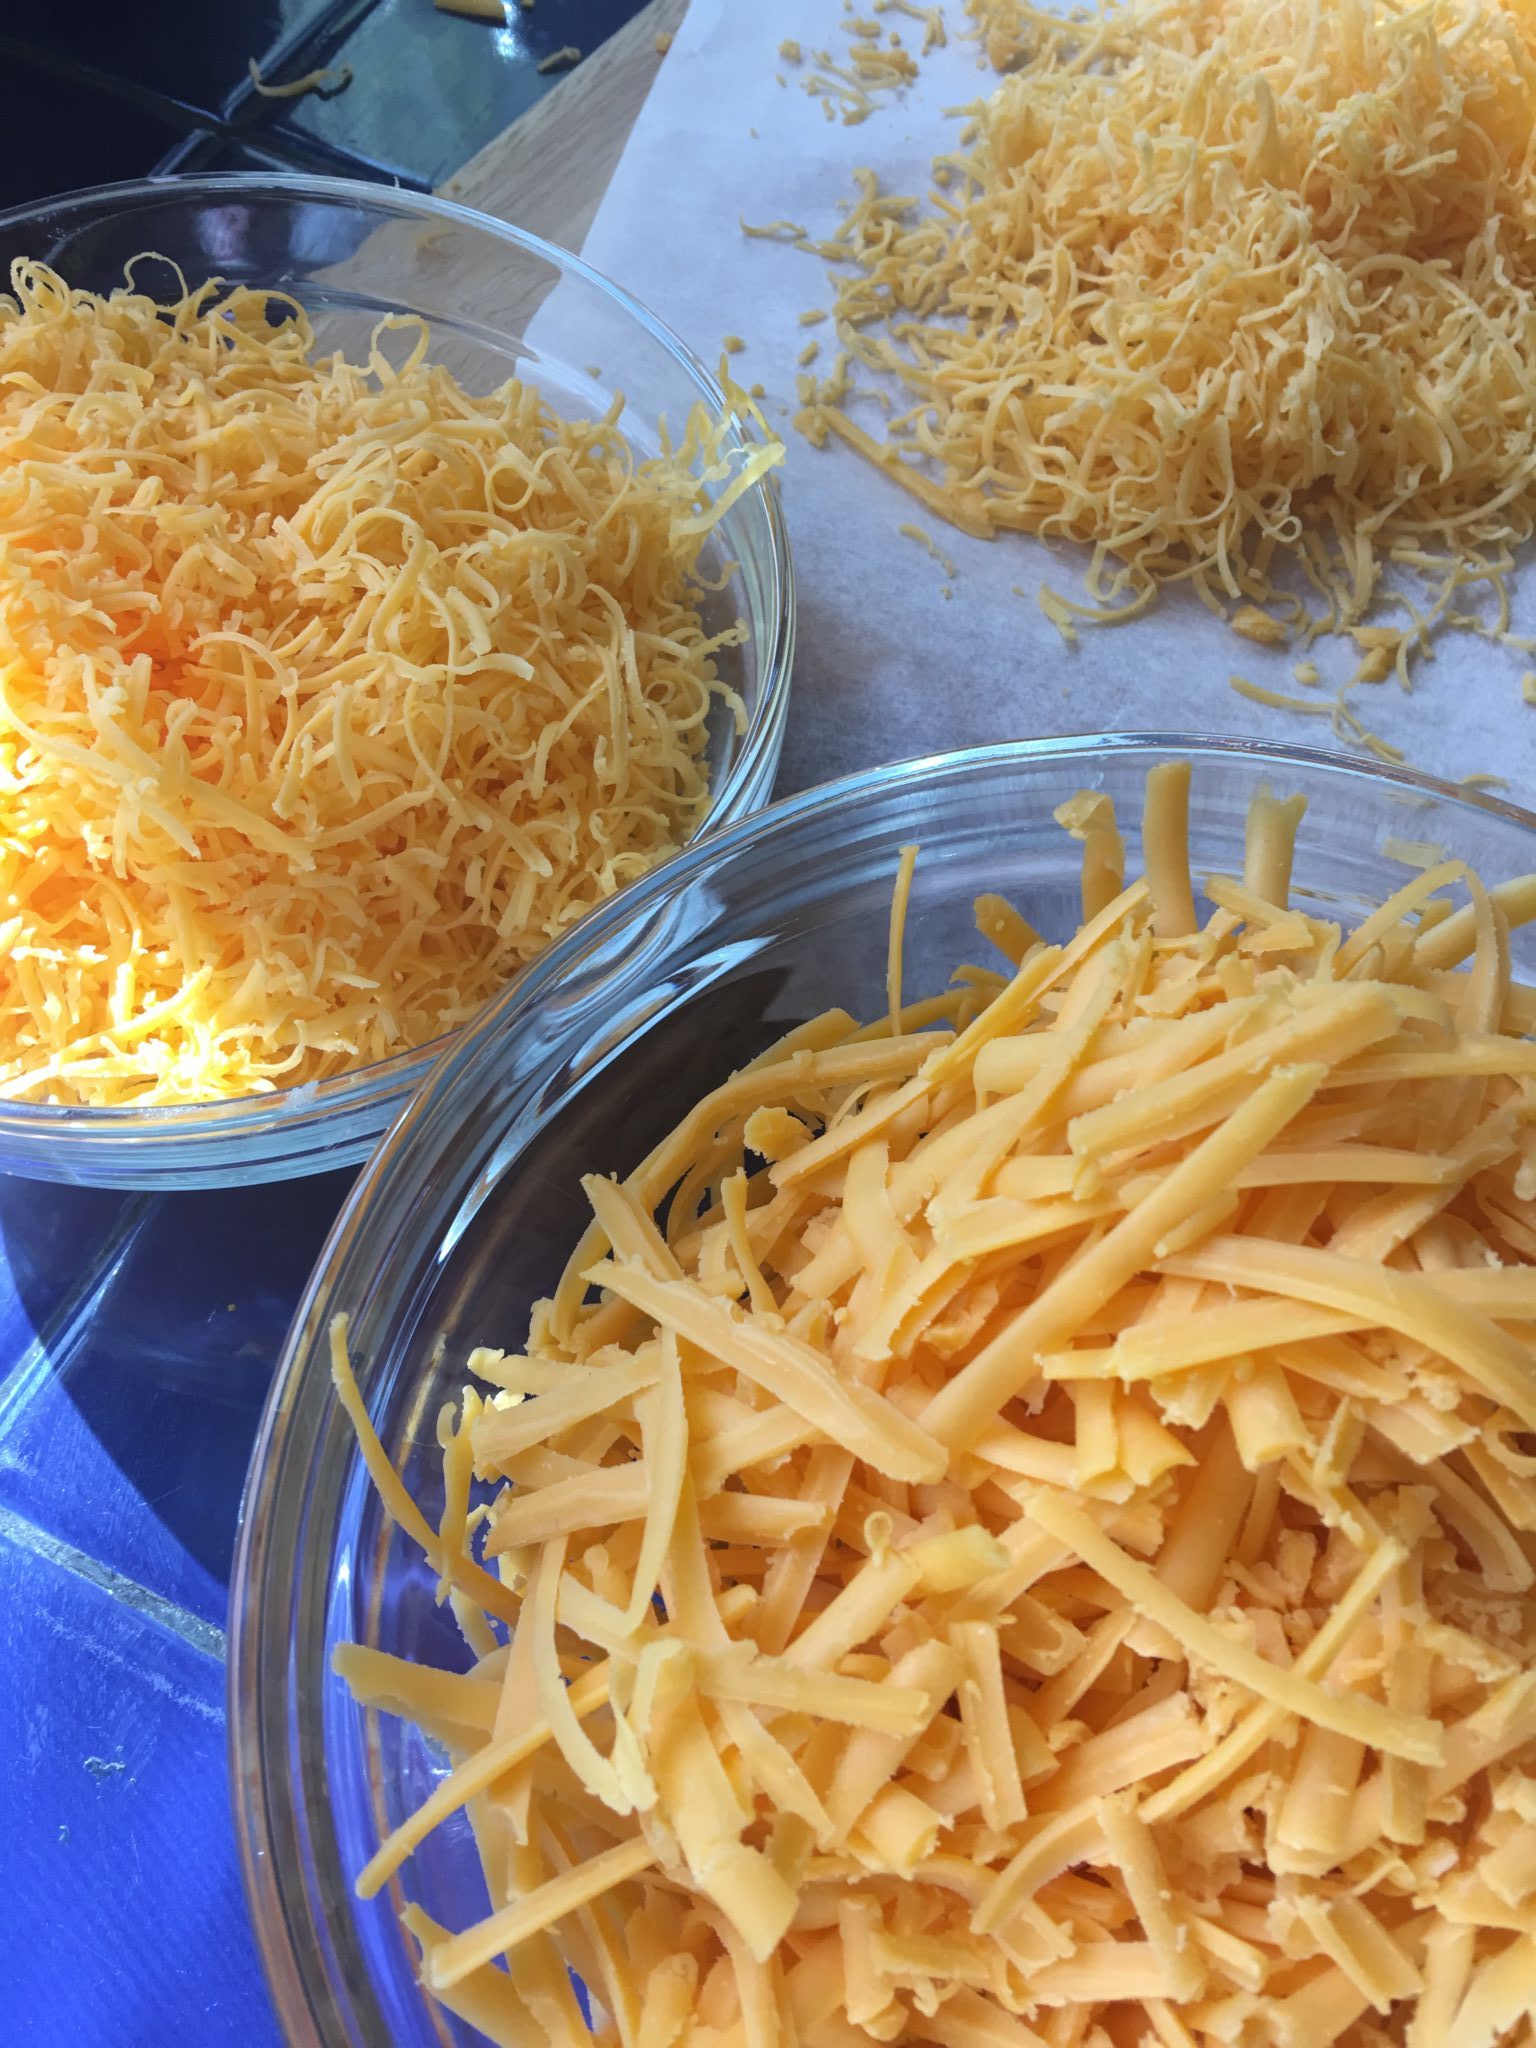 Coarsely and finely grated cheese in bowls